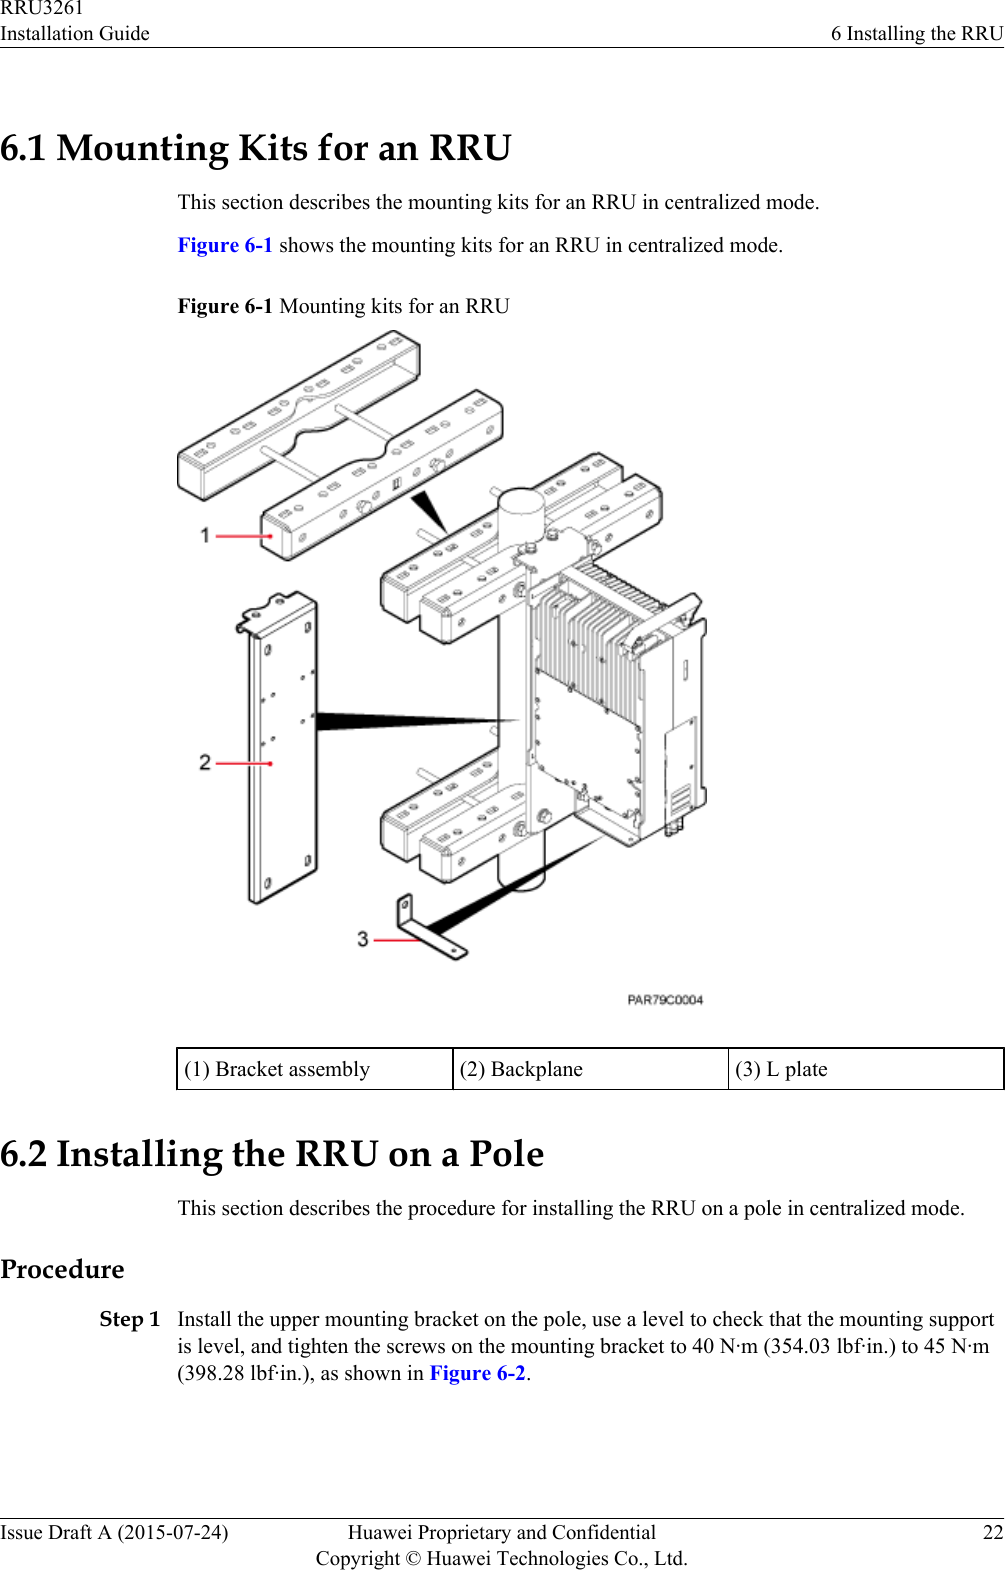 6.1 Mounting Kits for an RRUThis section describes the mounting kits for an RRU in centralized mode.Figure 6-1 shows the mounting kits for an RRU in centralized mode.Figure 6-1 Mounting kits for an RRU(1) Bracket assembly (2) Backplane (3) L plate6.2 Installing the RRU on a PoleThis section describes the procedure for installing the RRU on a pole in centralized mode.ProcedureStep 1 Install the upper mounting bracket on the pole, use a level to check that the mounting supportis level, and tighten the screws on the mounting bracket to 40 N·m (354.03 lbf·in.) to 45 N·m(398.28 lbf·in.), as shown in Figure 6-2.RRU3261Installation Guide 6 Installing the RRUIssue Draft A (2015-07-24) Huawei Proprietary and ConfidentialCopyright © Huawei Technologies Co., Ltd.22